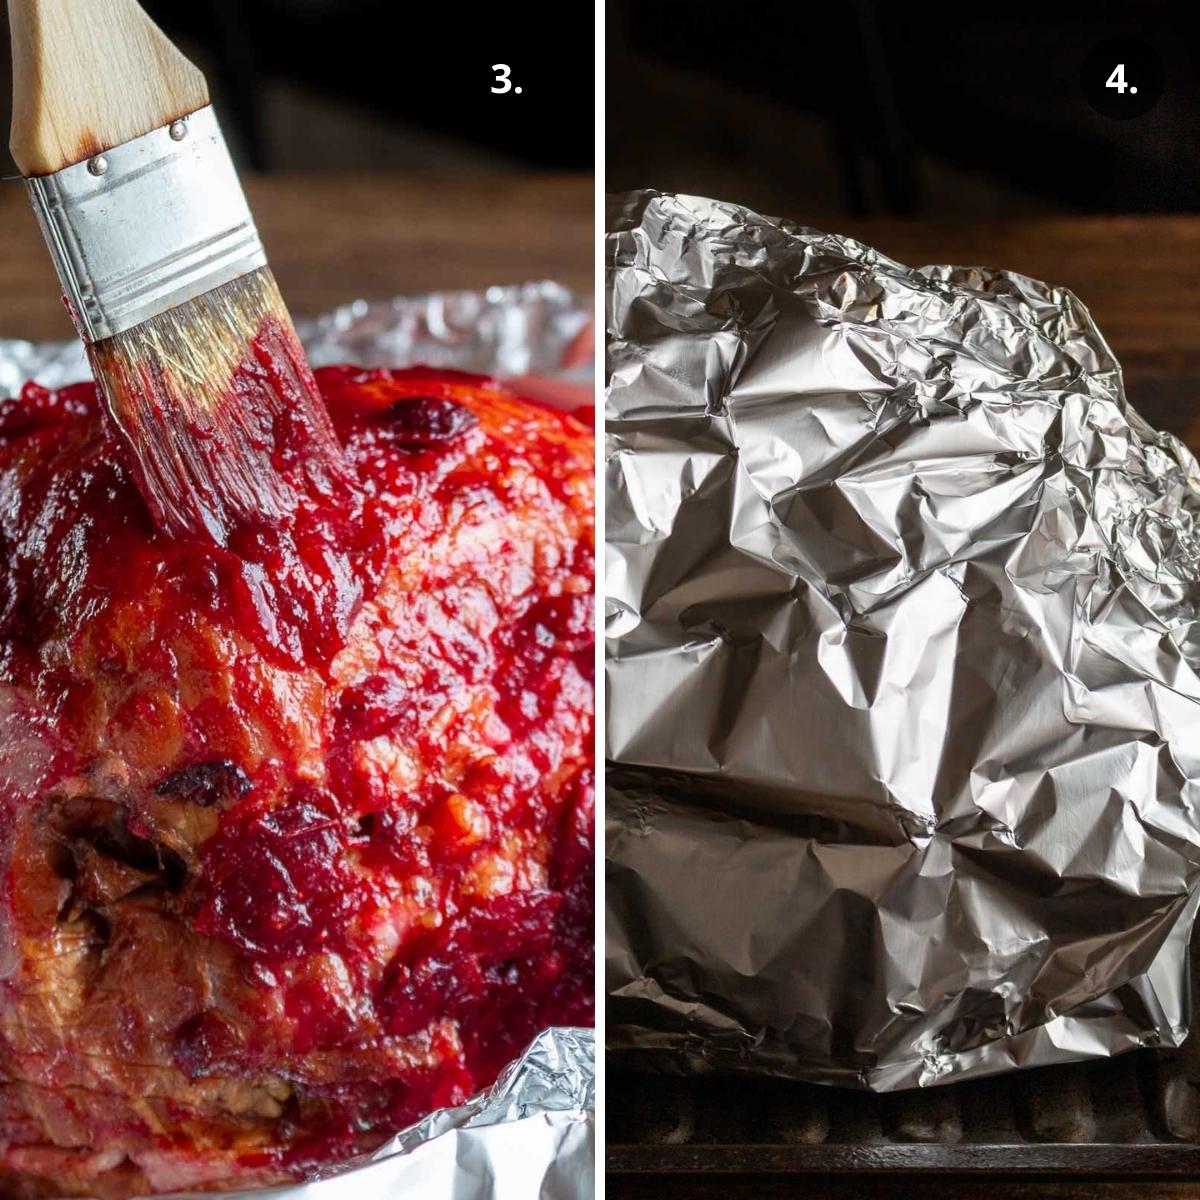 Ham getting glazed with cranberry sauce and then wrapped back up in foil.